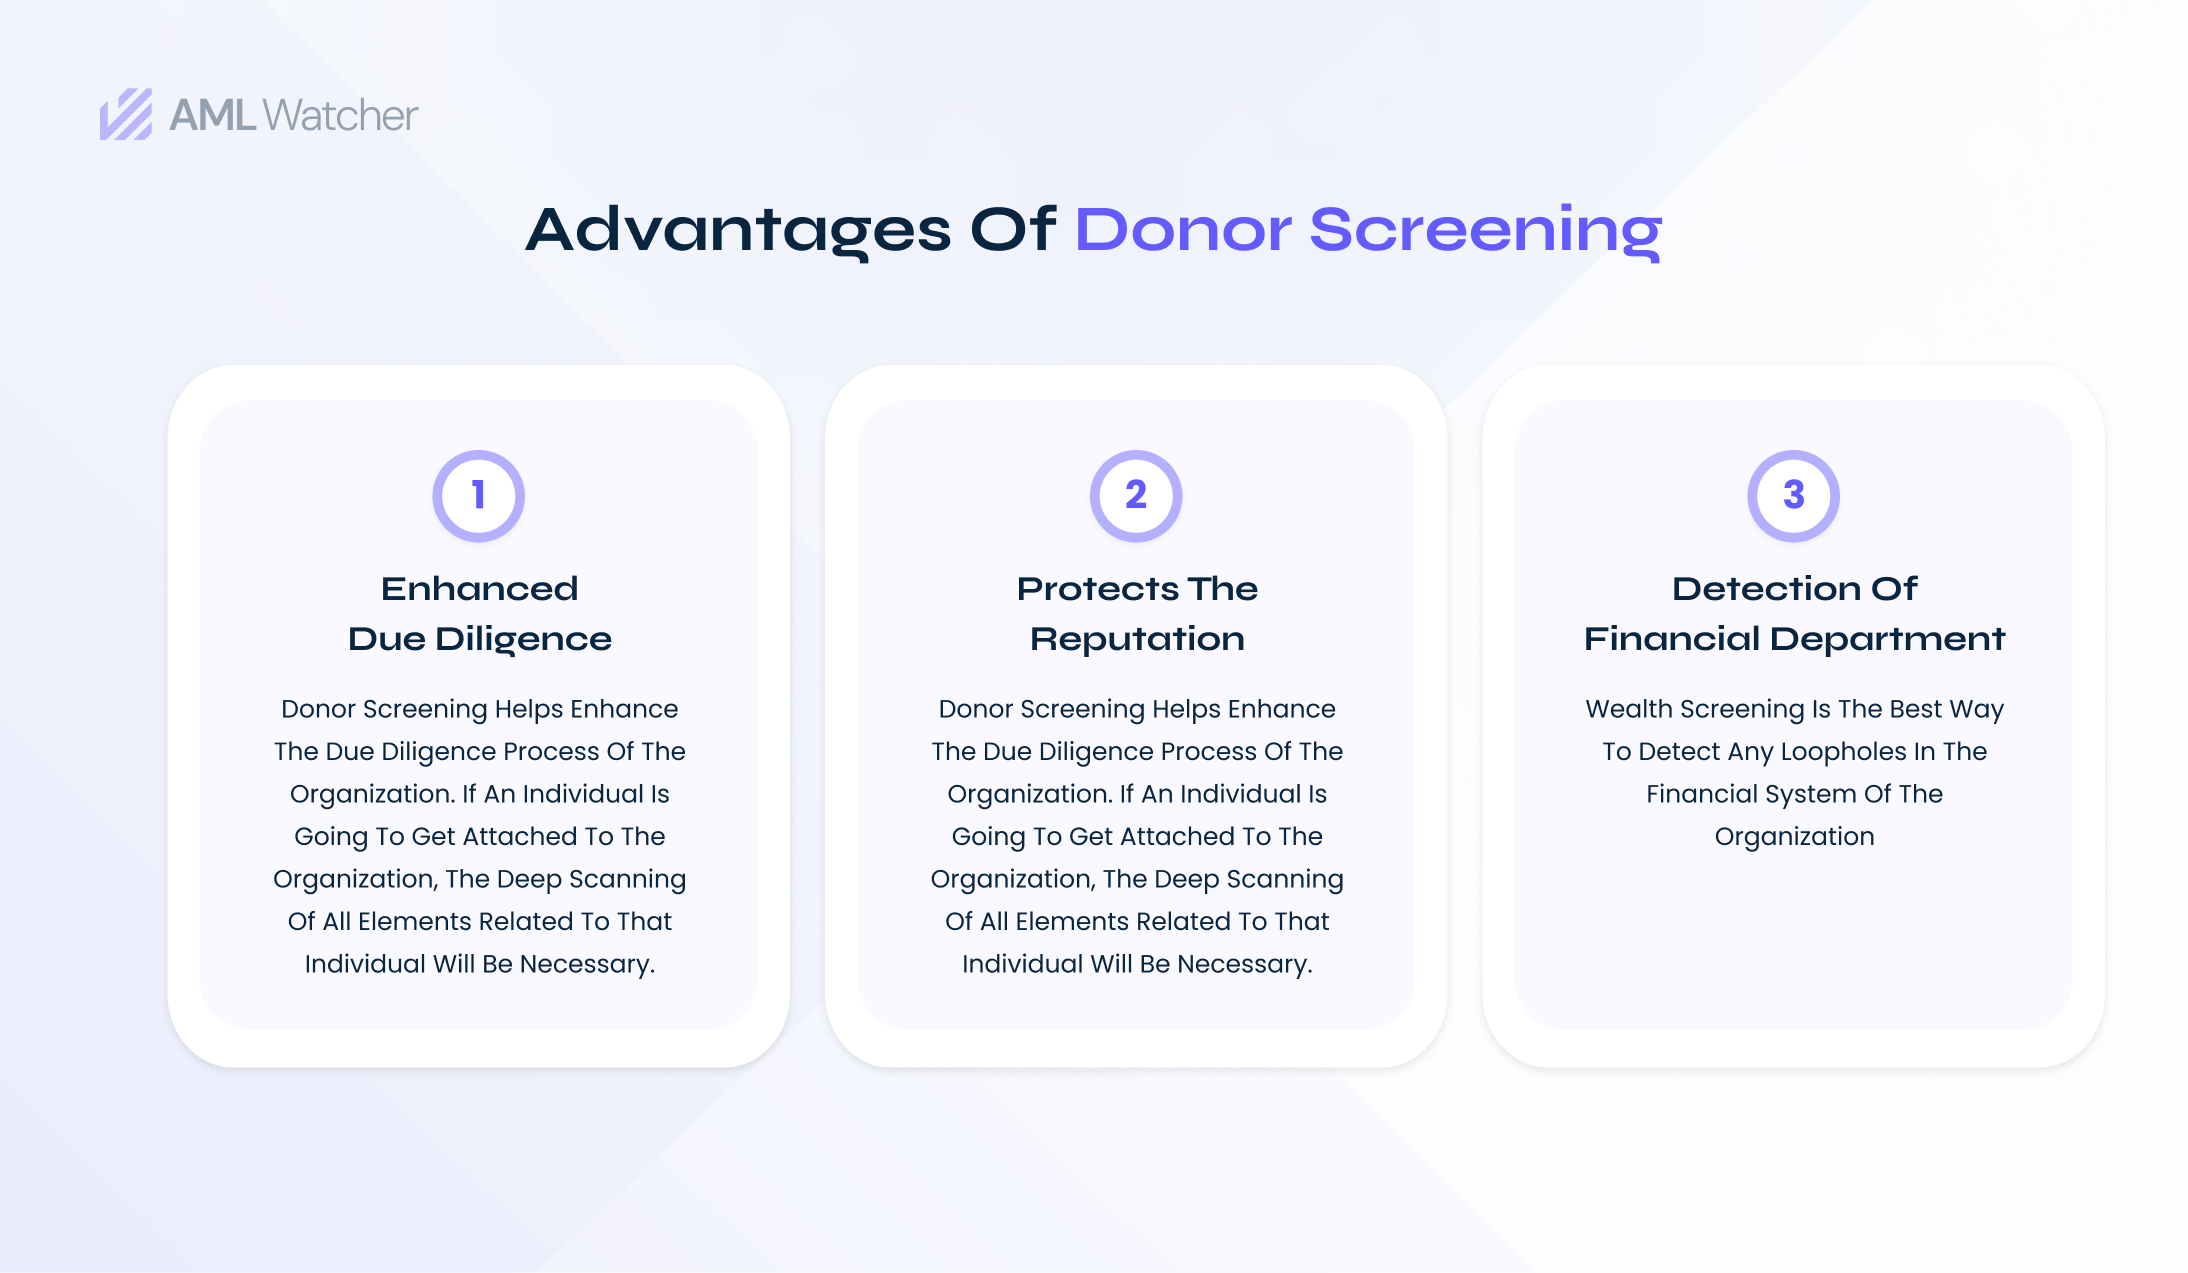 Organizations enjoy a large number of perks with the help of donor screening.